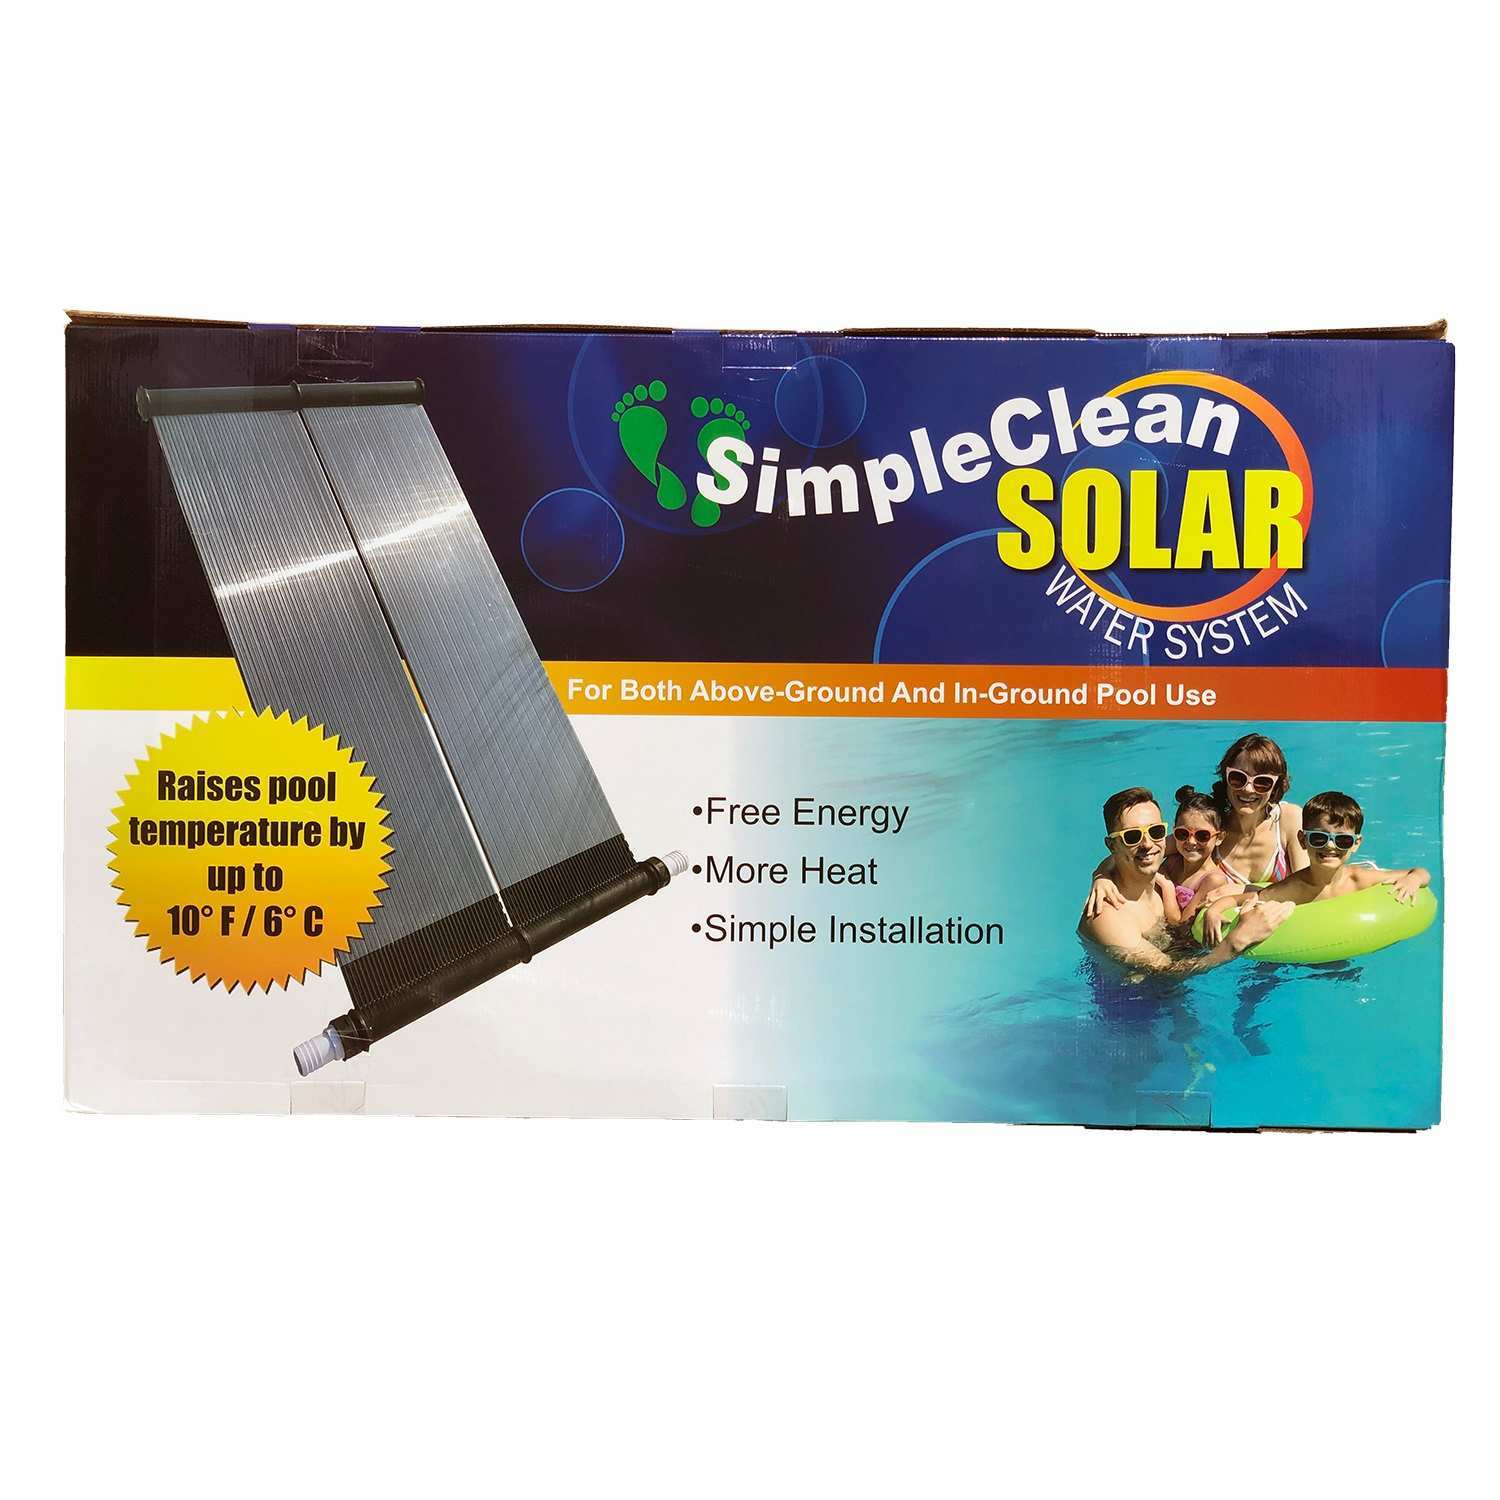 SIMPLE CLEAN SOLAR WATER SYSTEM